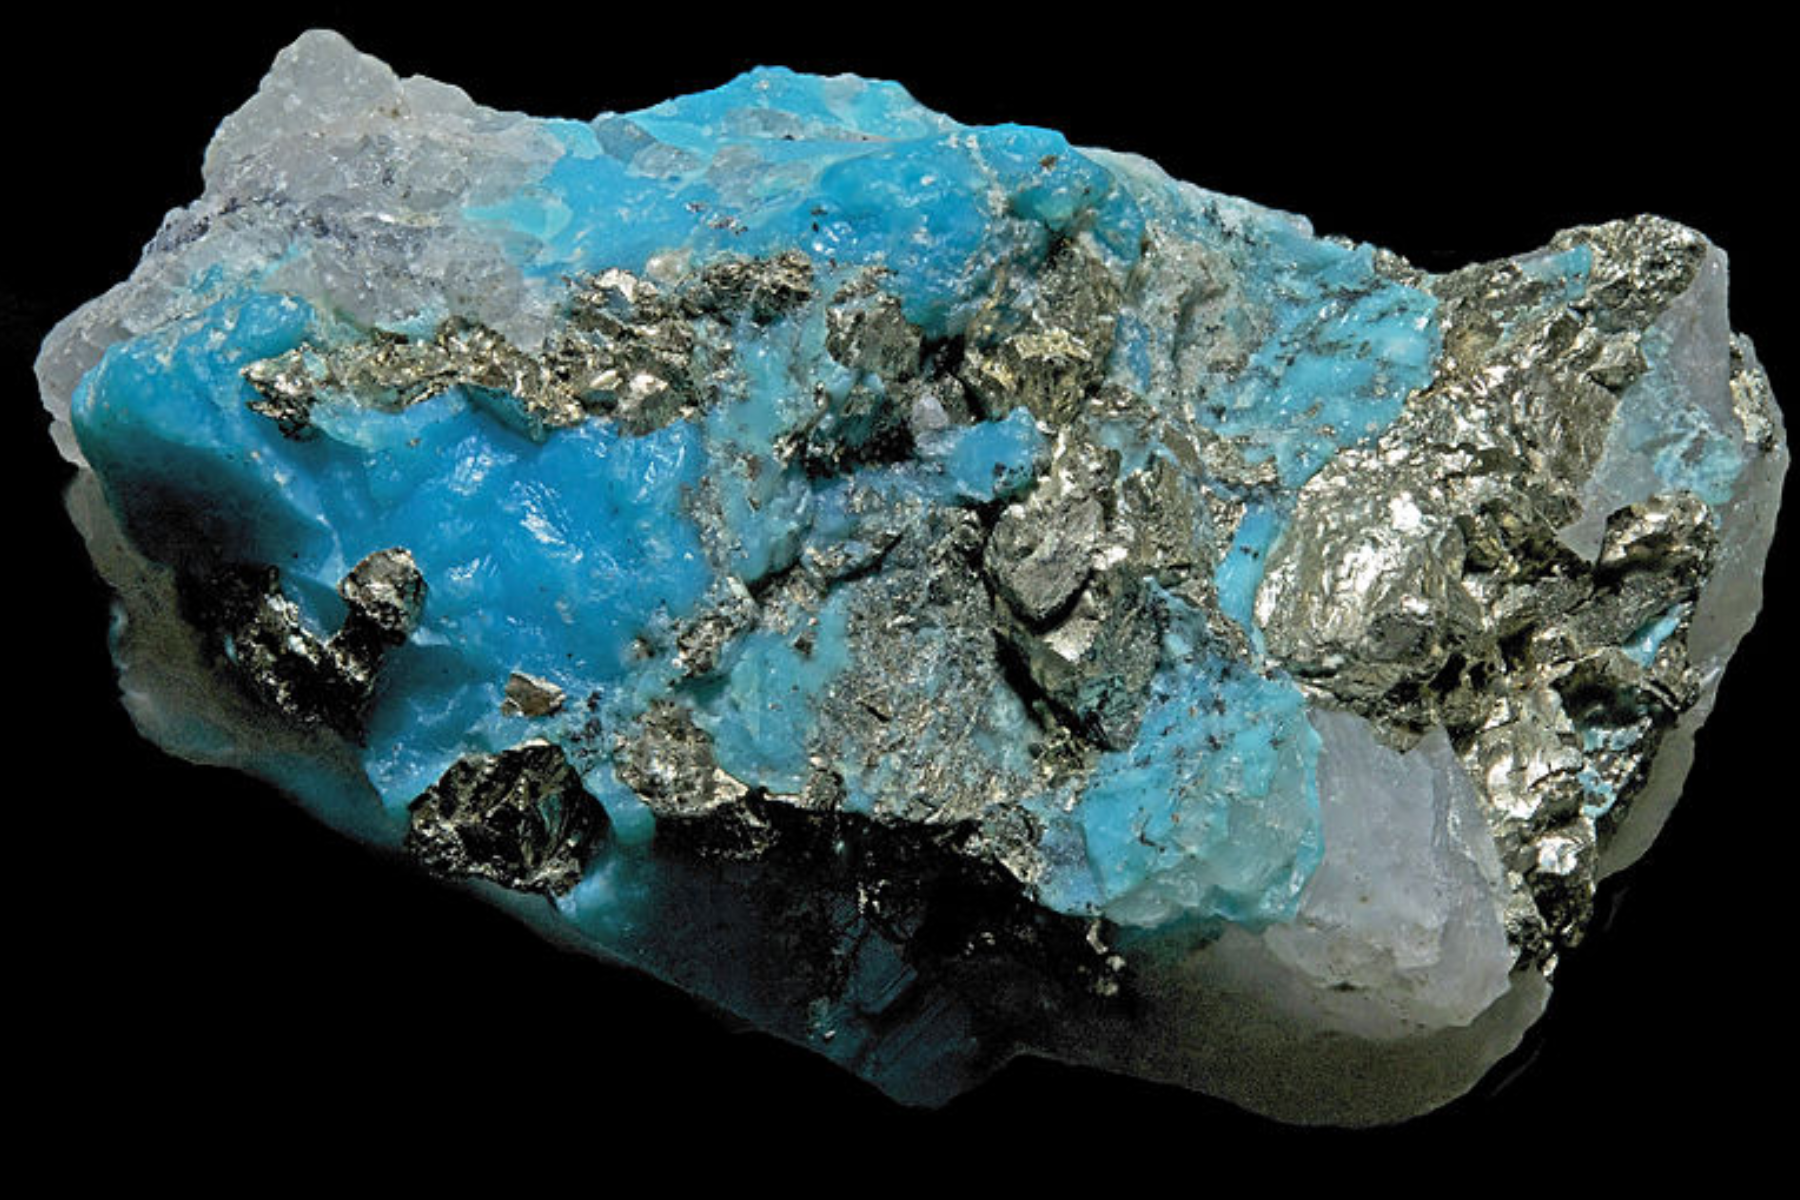 Turquoise still connected to its host rock